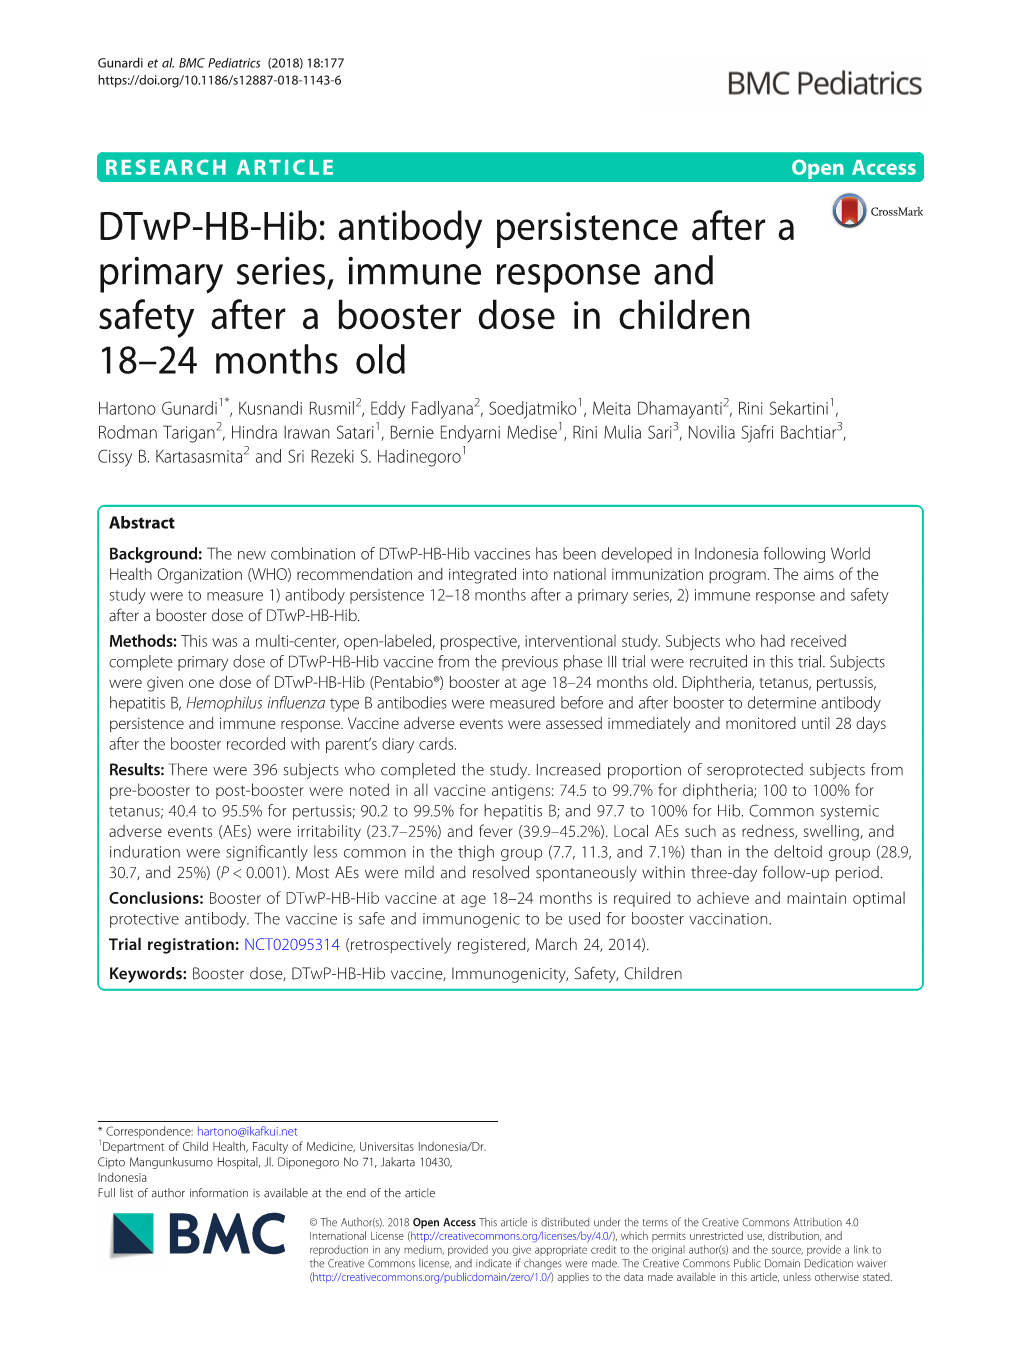 Dtwp-HB-Hib: Antibody Persistence After a Primary Series, Immune